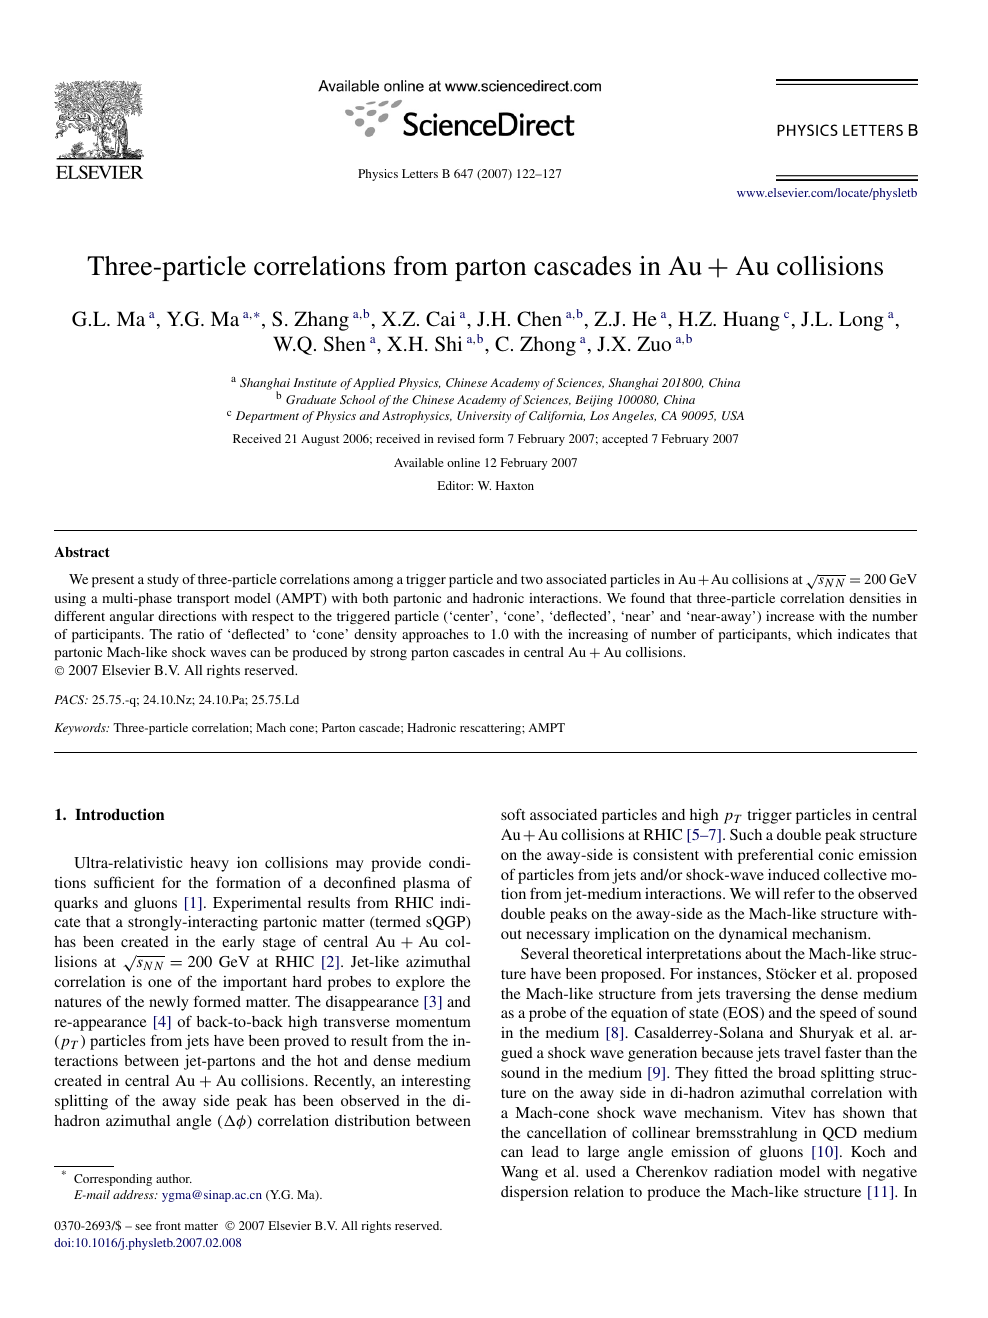 Three Particle Correlations From Parton Cascades In Au Au Collisions Topic Of Research Paper In Physical Sciences Download Scholarly Article Pdf And Read For Free On Cyberleninka Open Science Hub